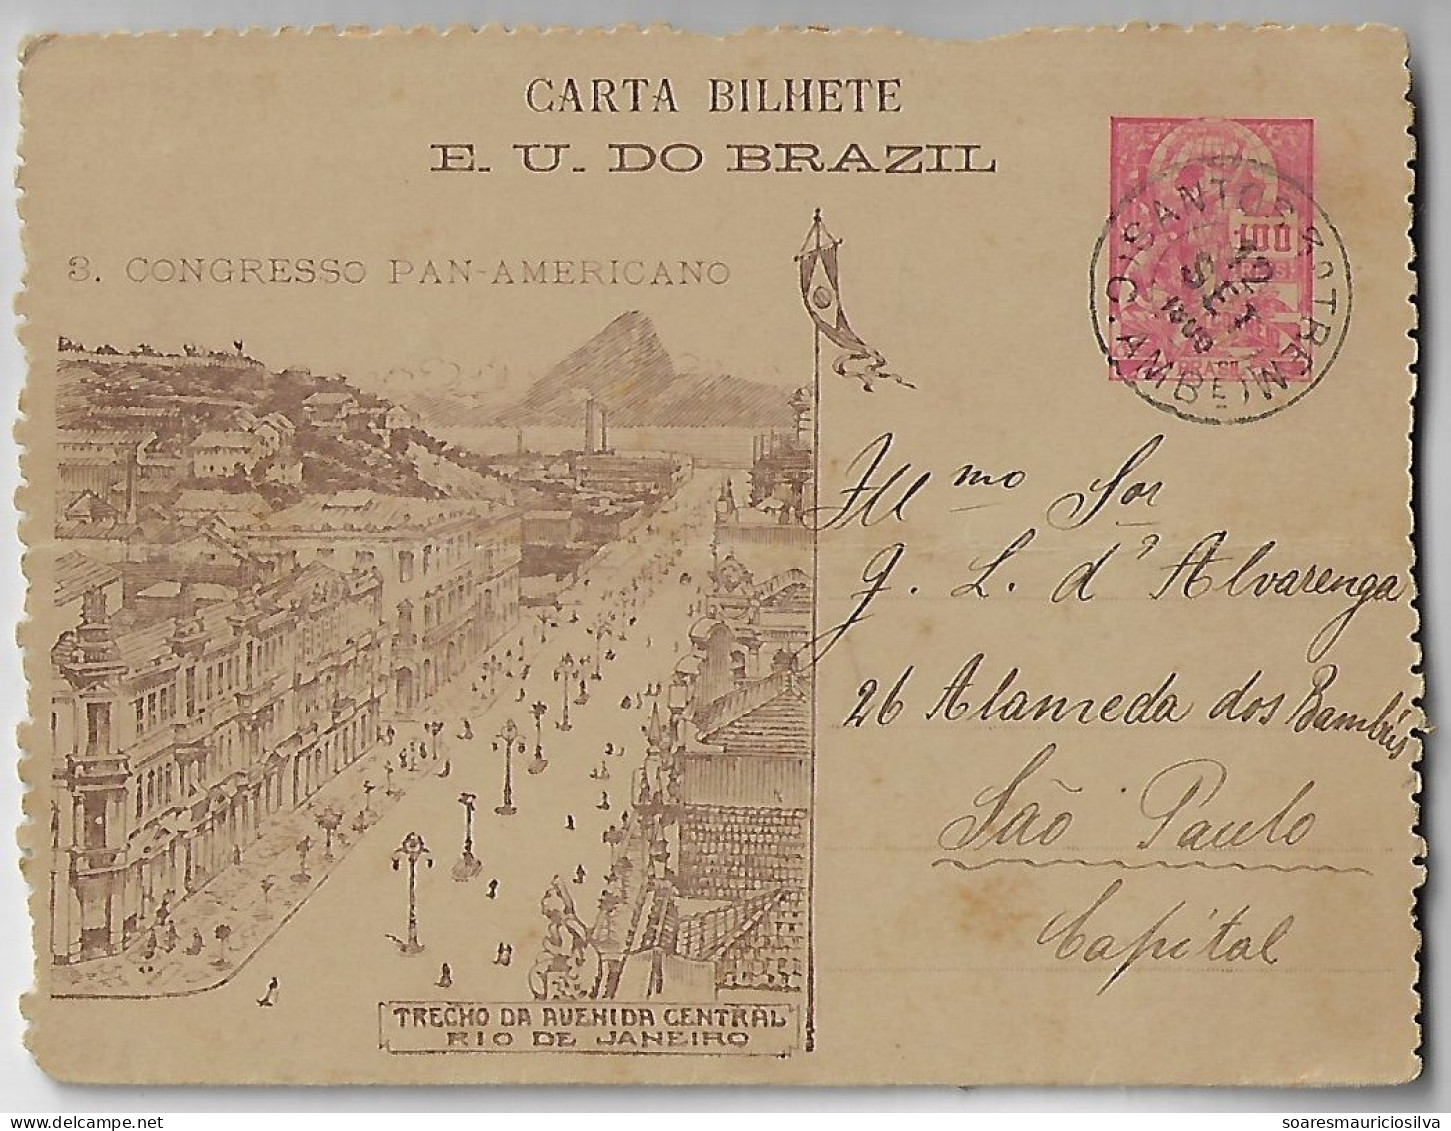 Brazil 1906 Postal Stationery Letter Sheet 3rd Pan-American Congress Central Avenue In RJ Perforation 6¾ Railway Cancel - Enteros Postales